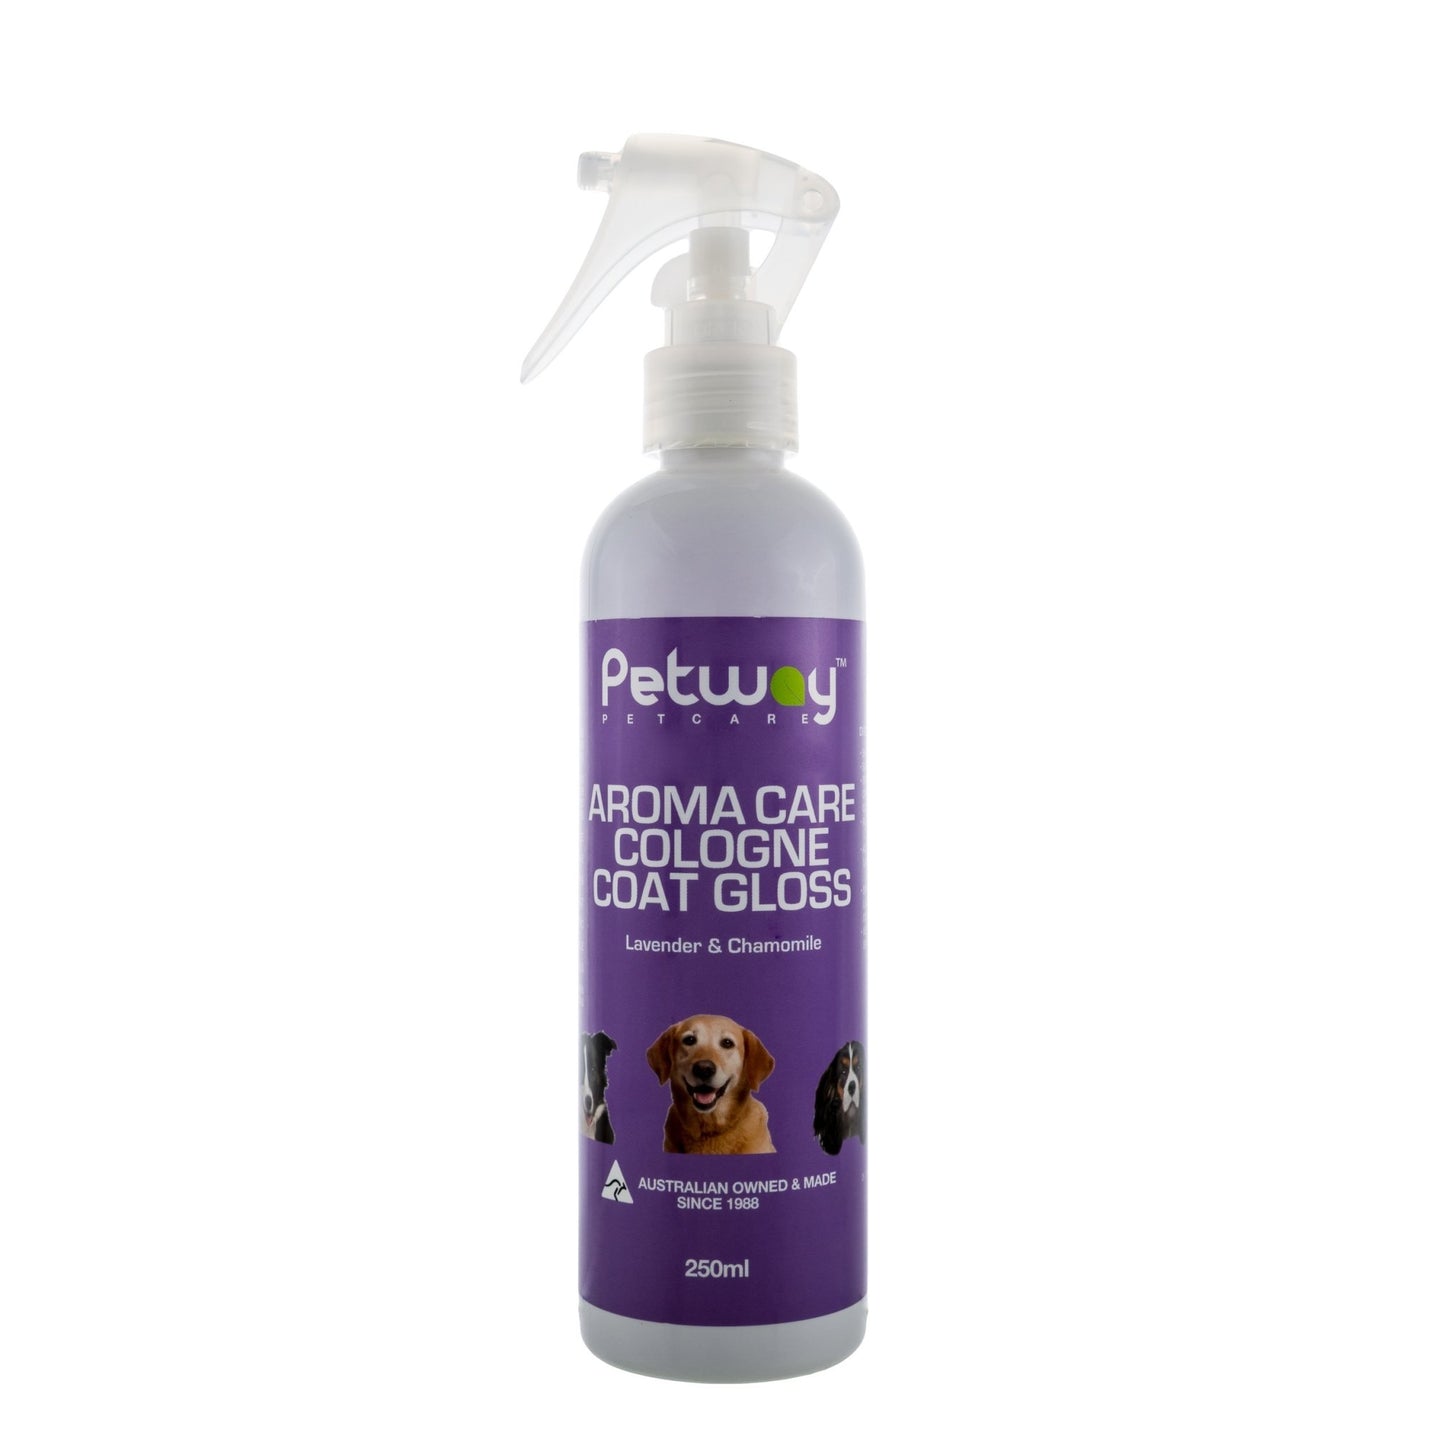 Petway Aroma Care Cologne 250ml - Woonona Petfood & Produce